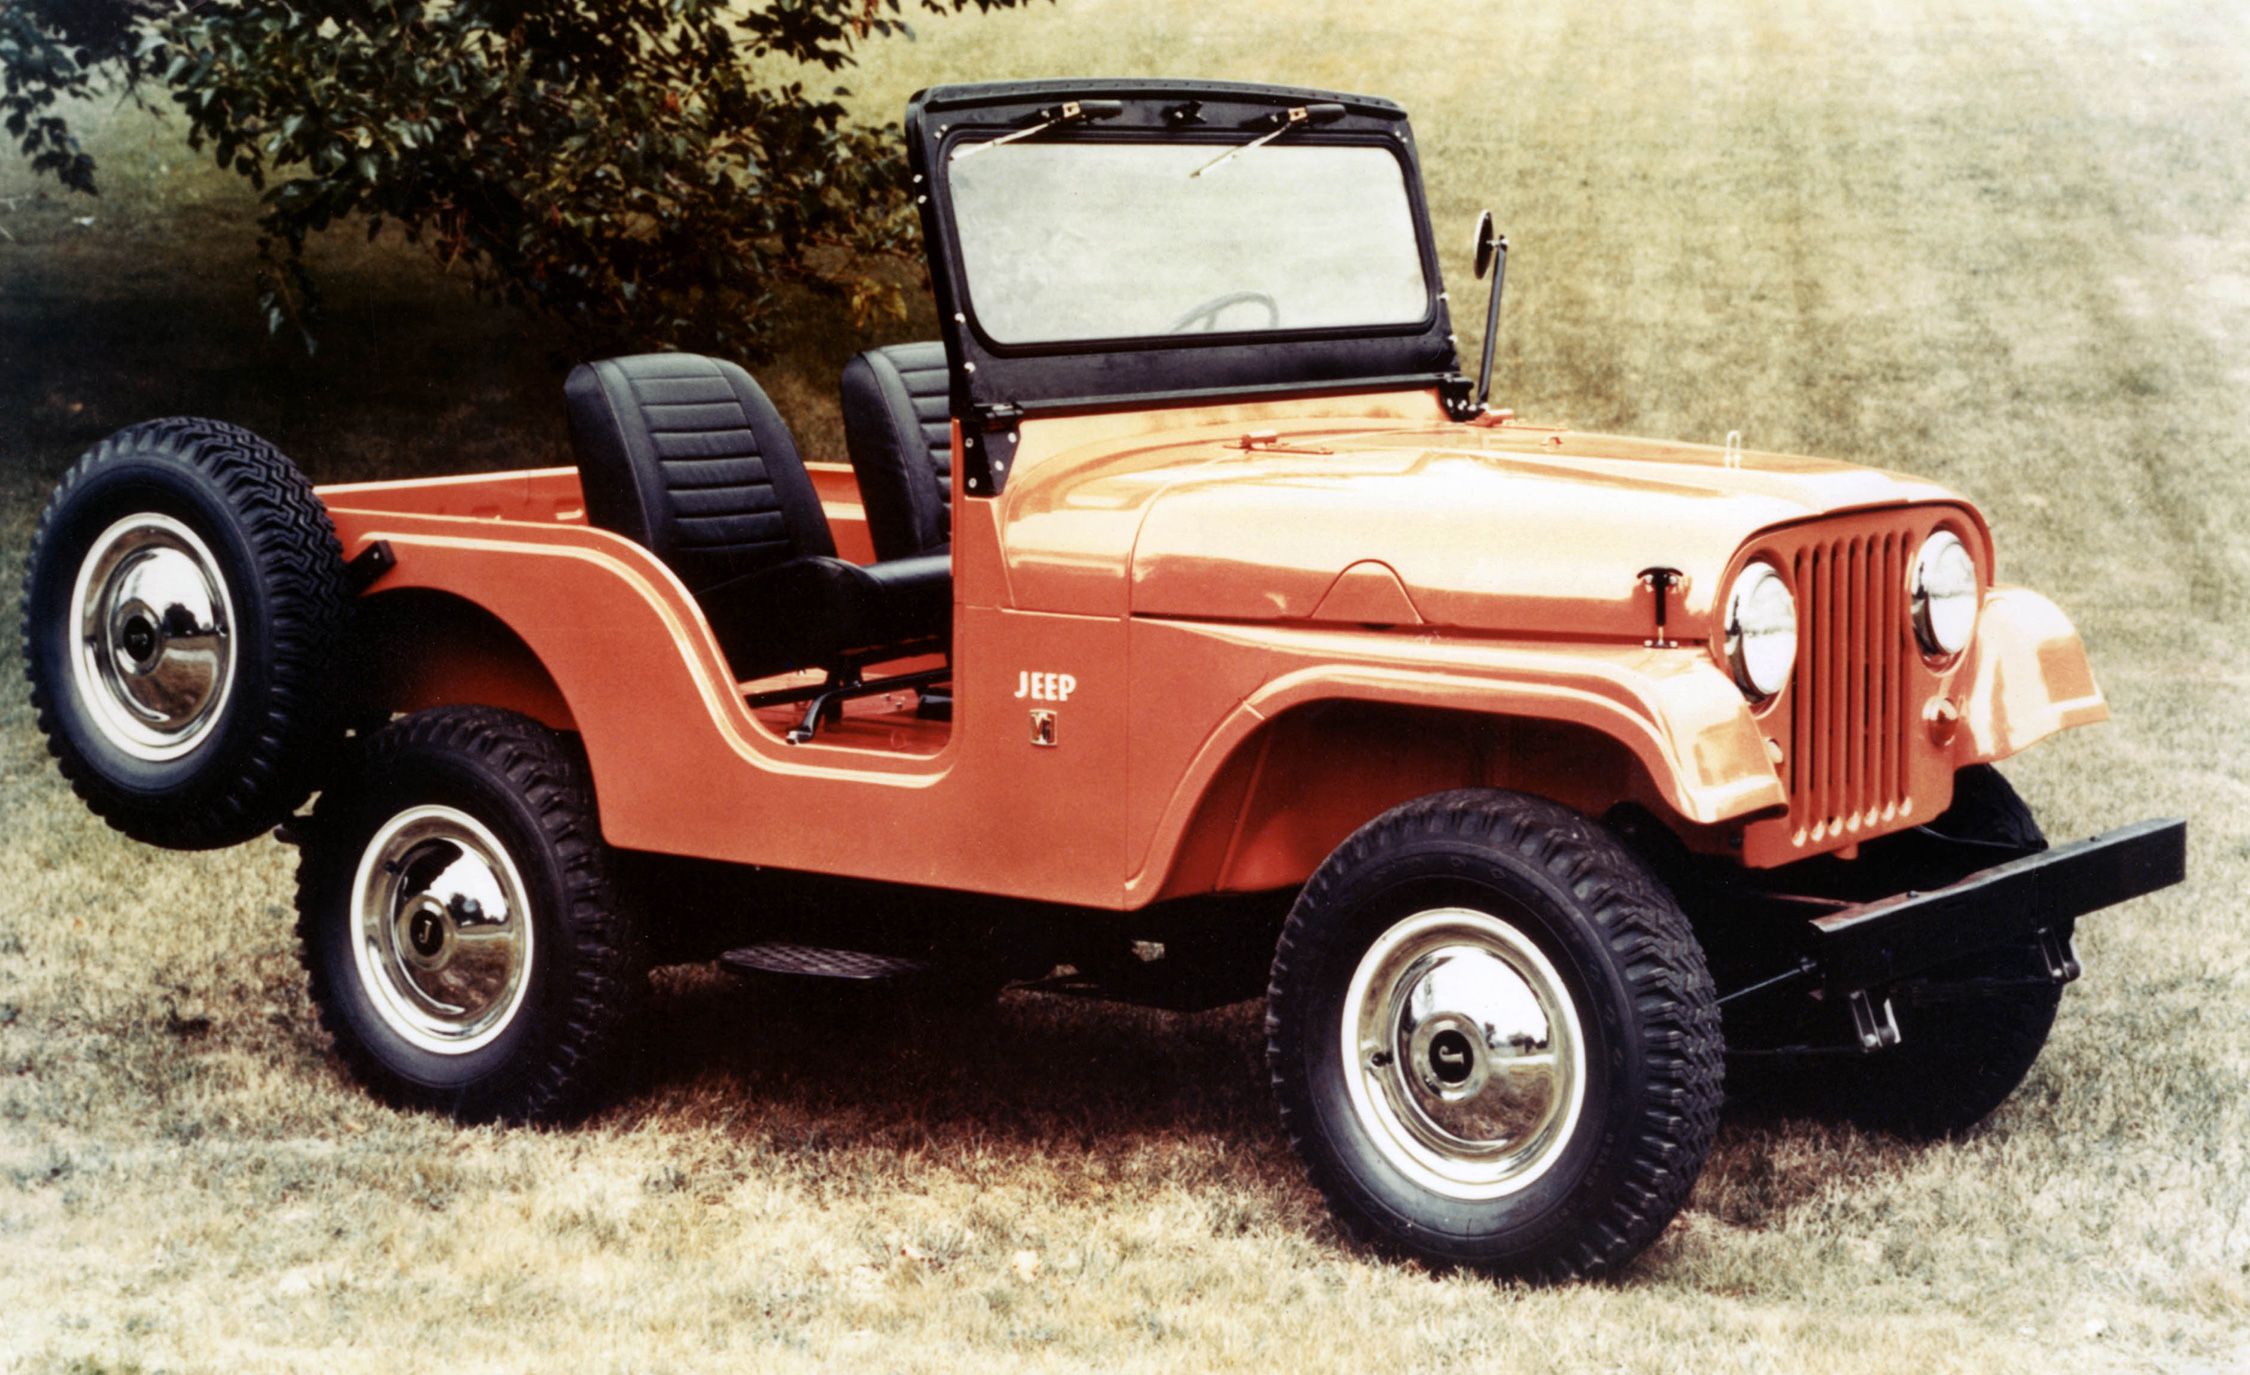 Visual History of the Jeep Wrangler, from 1986 to Present